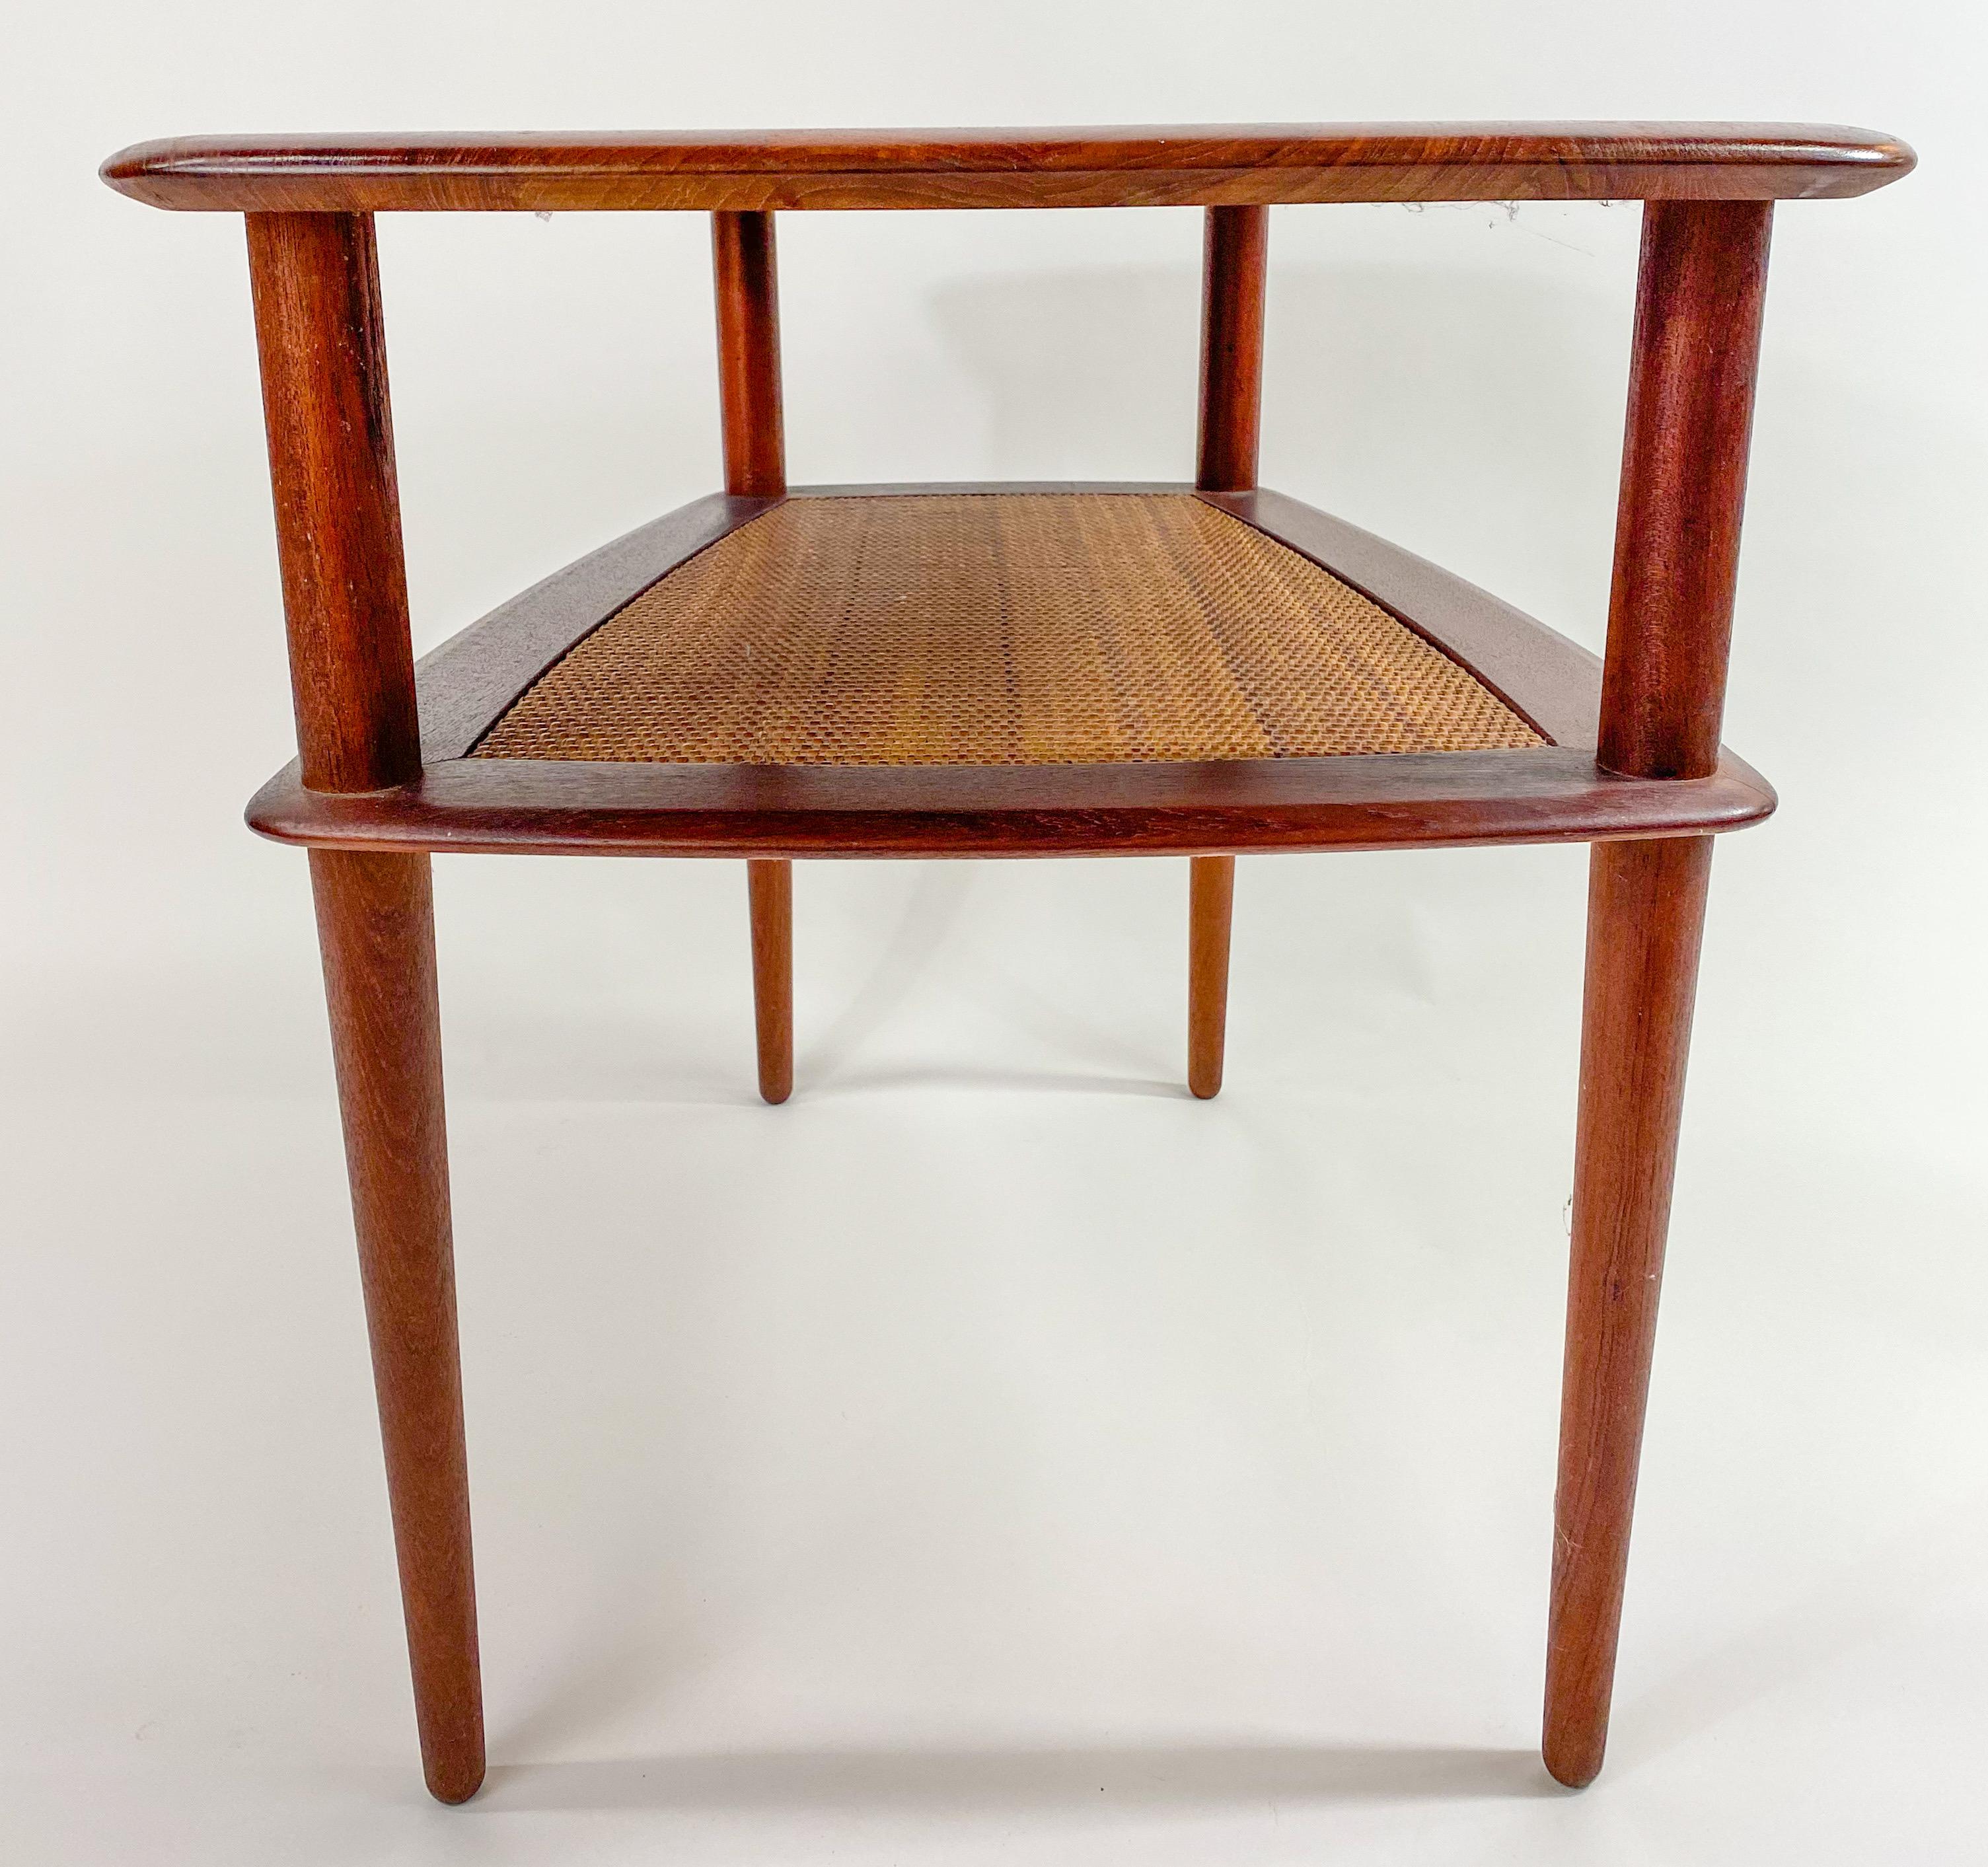 Cane Mid-Century Modern Danish John Stuart Two Tier Wooden Side or End Table, a Pair